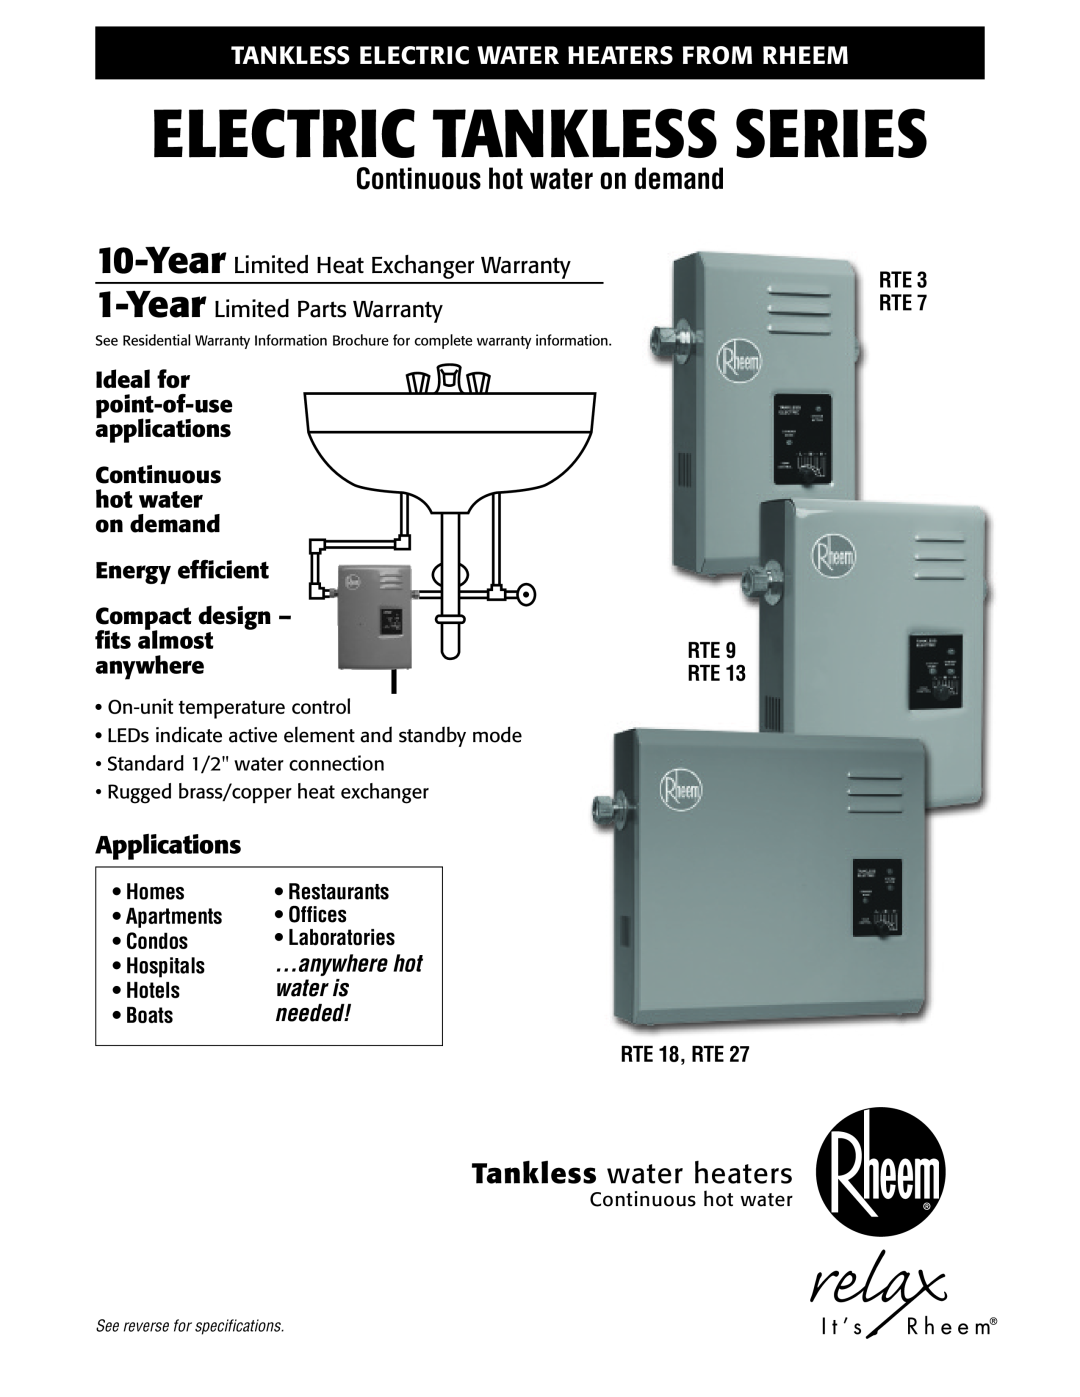 Rheem RTE 13 warranty Ideal for point-of-use applications Continuous hot water on demand, Energy efficient, Compact design 